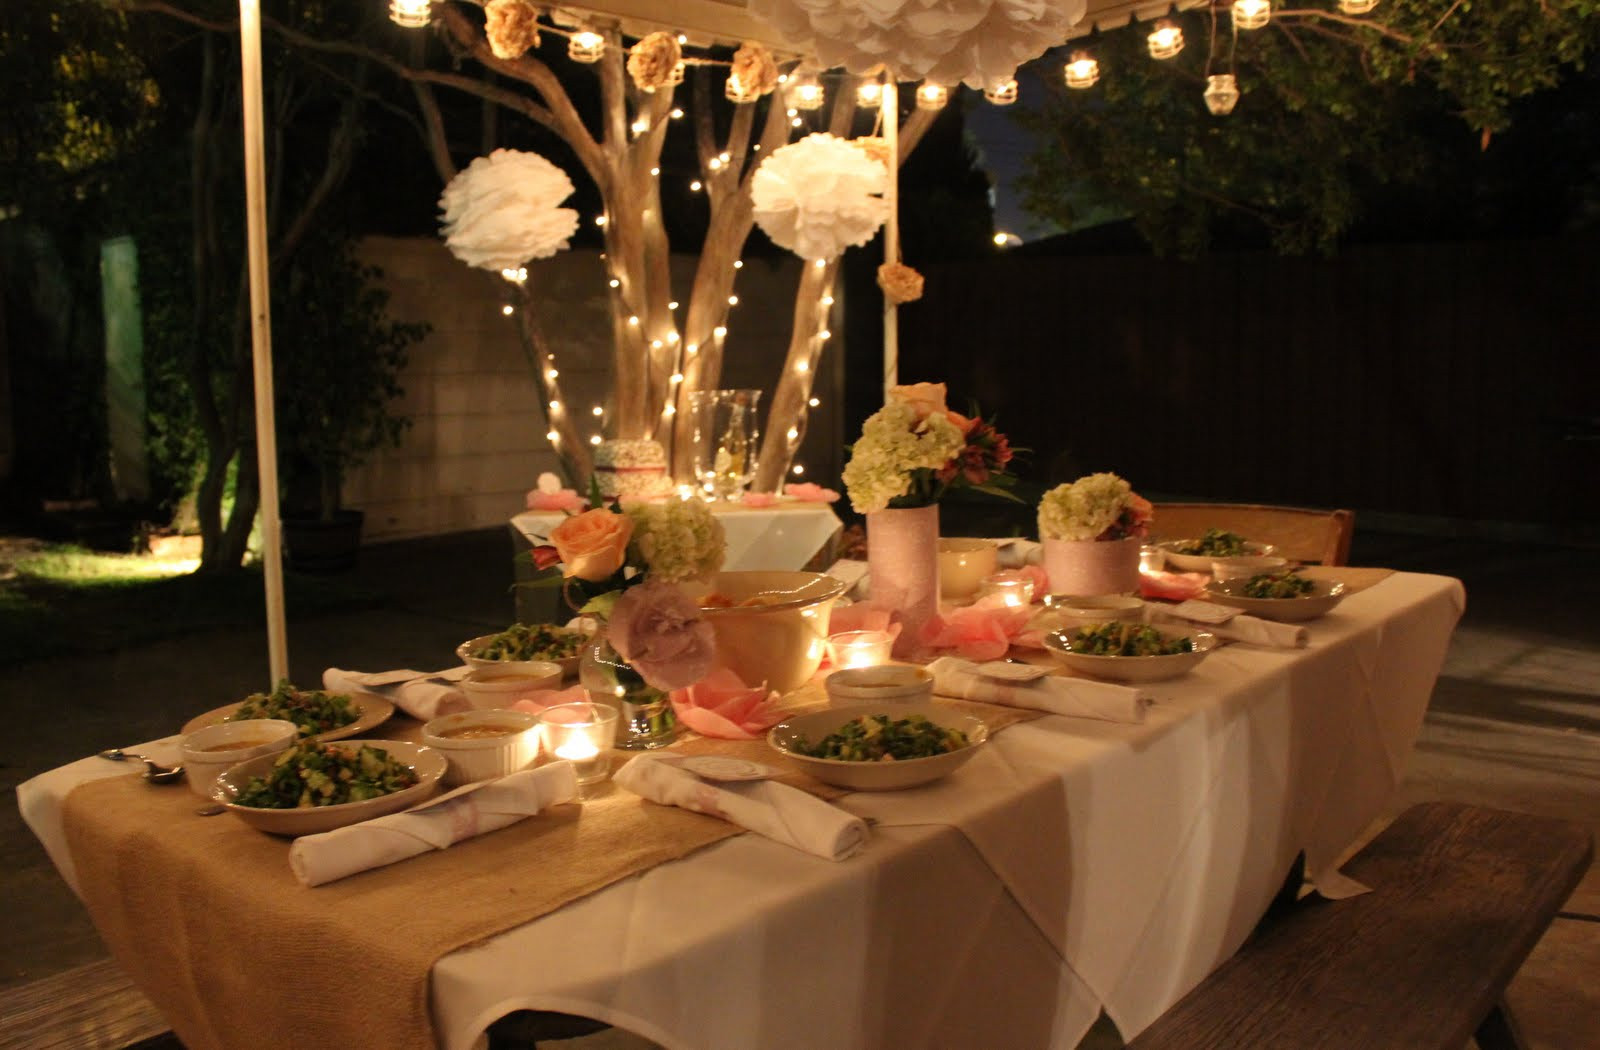 Elegant Birthday Party Decorations
 Juneberry Lane Outdoor Champagne Soirée A Simple